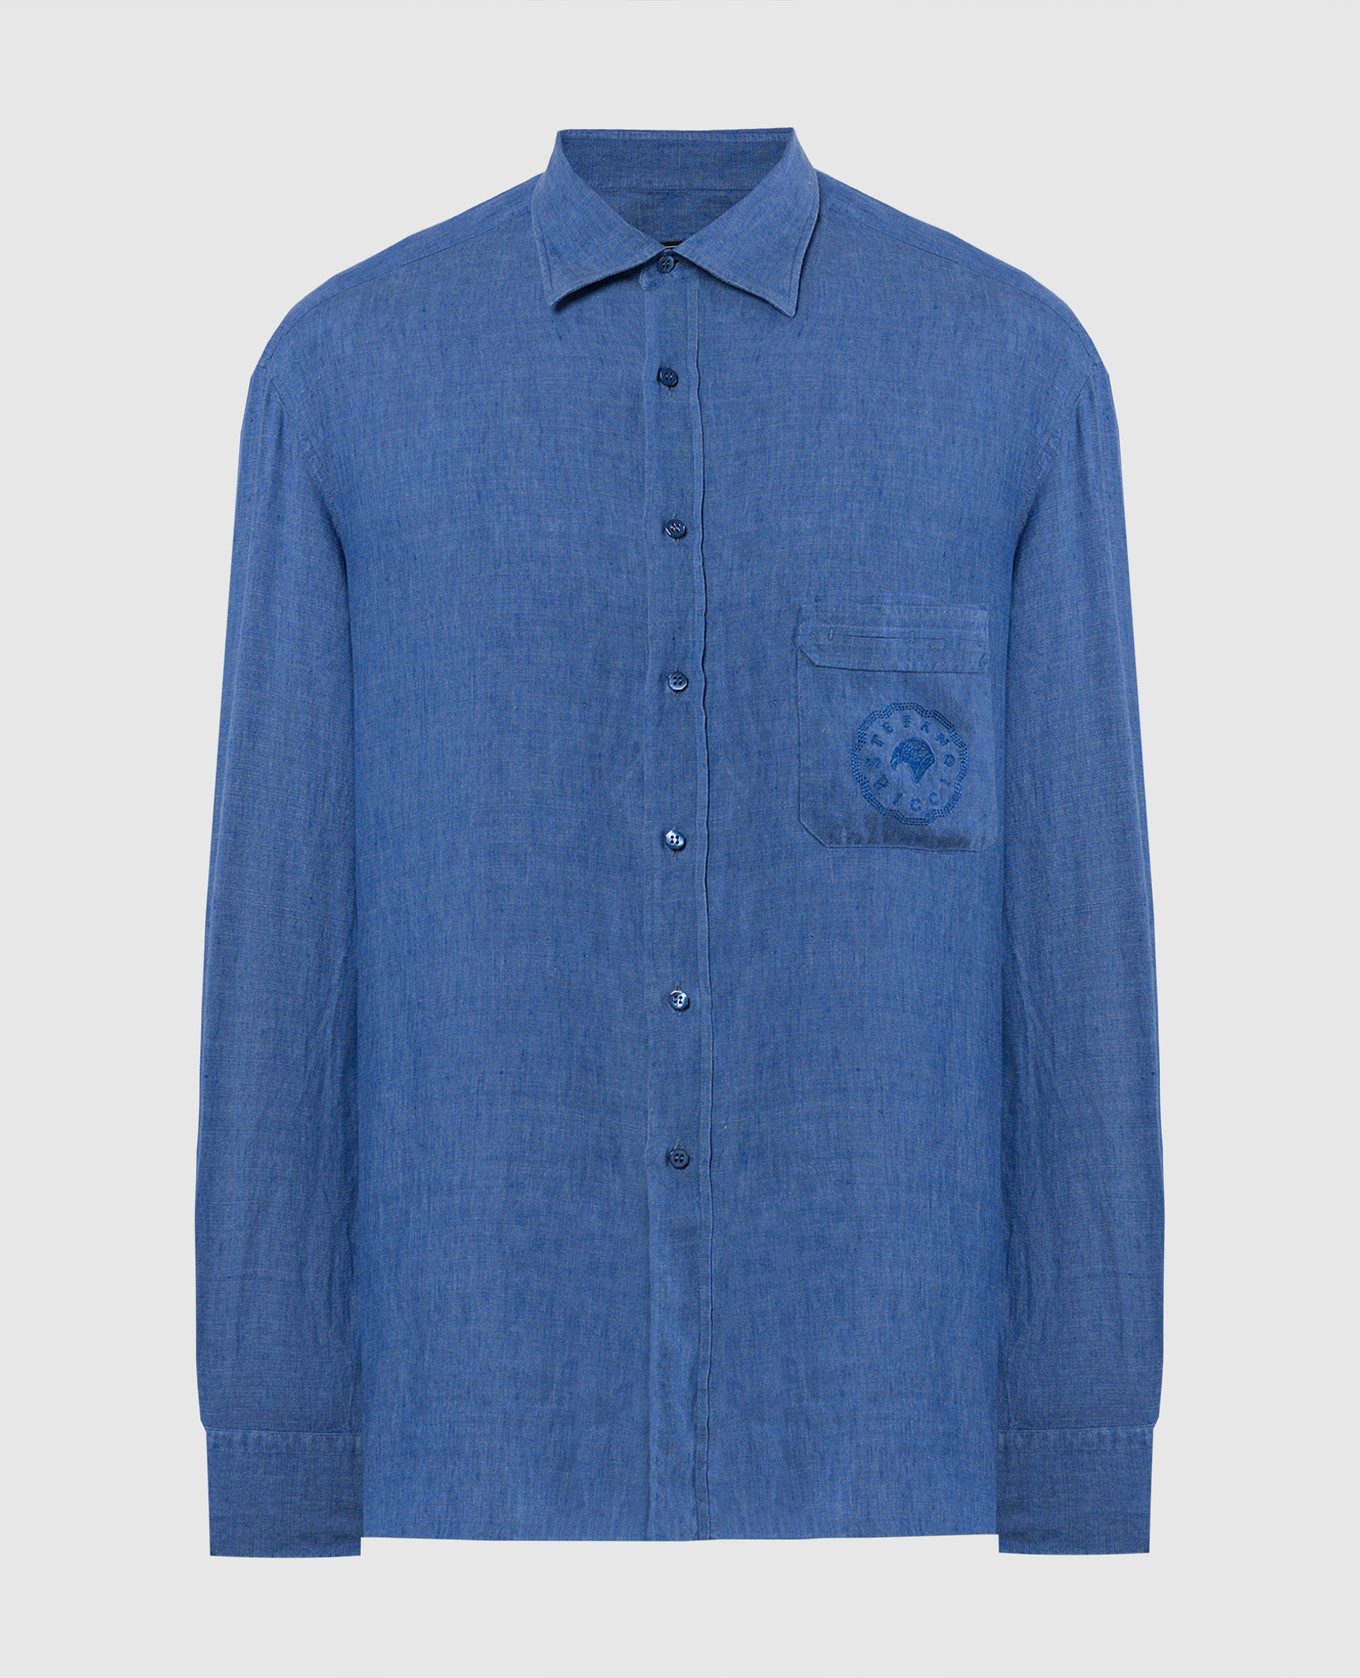 Blue linen shirt with logo embroidery